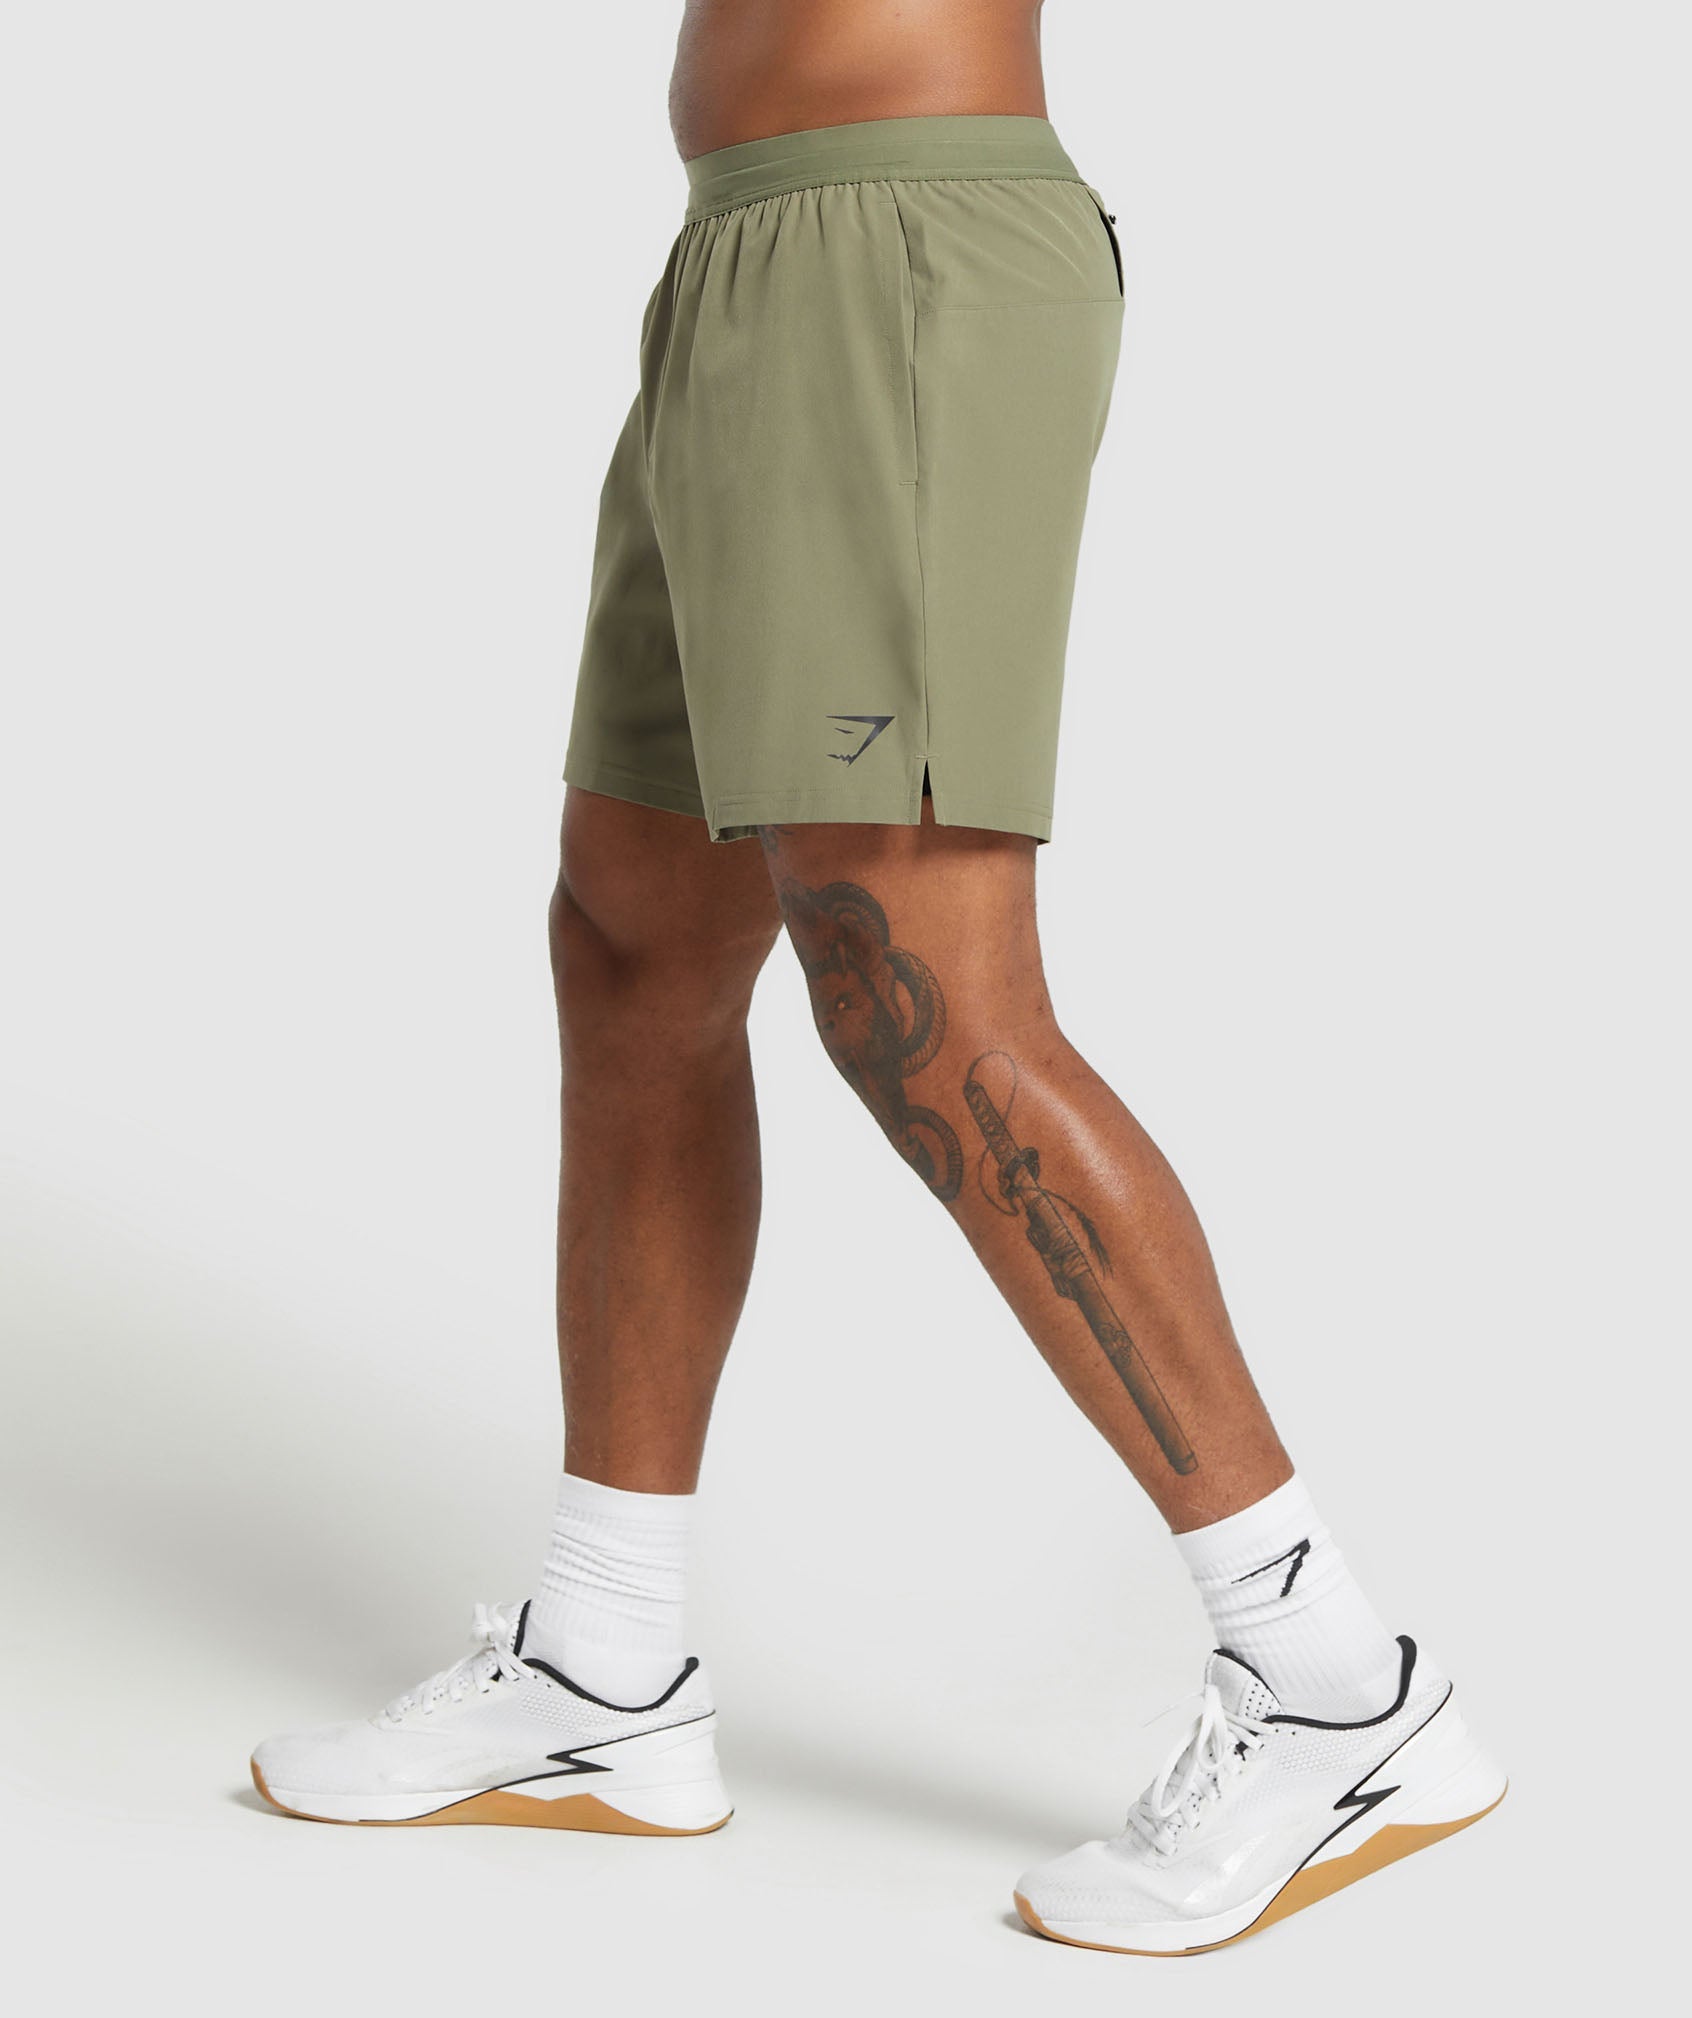 Land to Water 6" Shorts in Utility Green - view 3